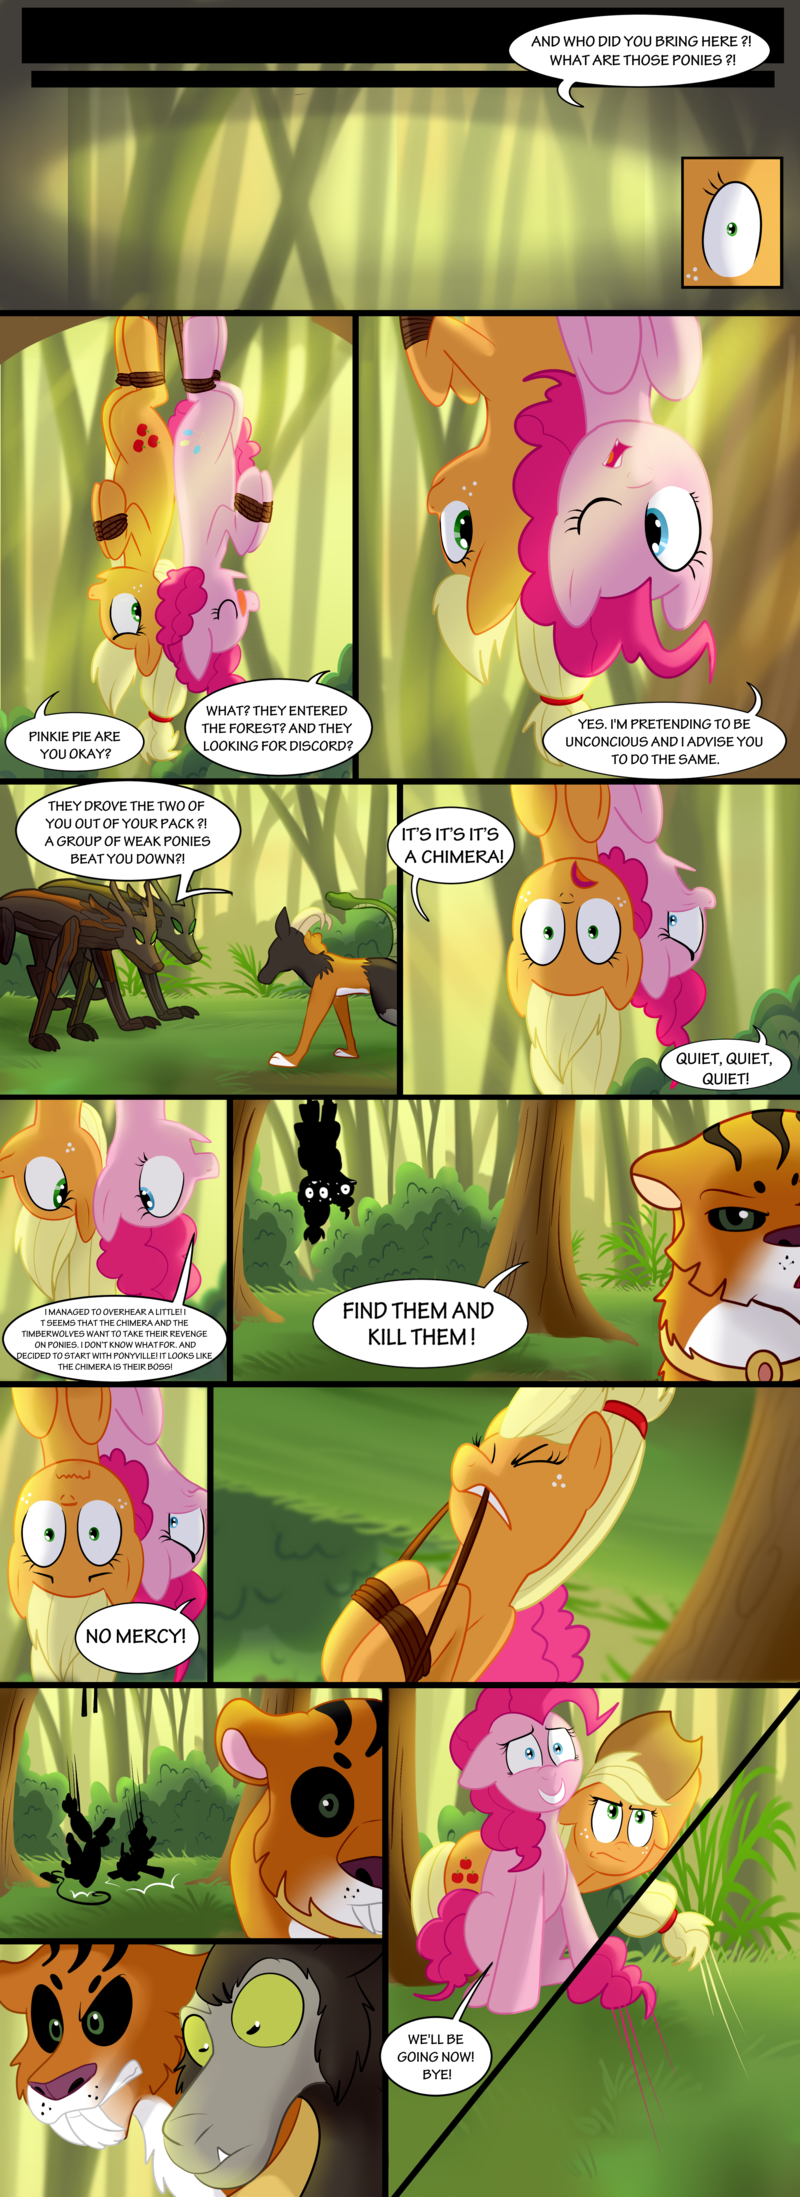 Page 79-80: What about Pinkie and AJ